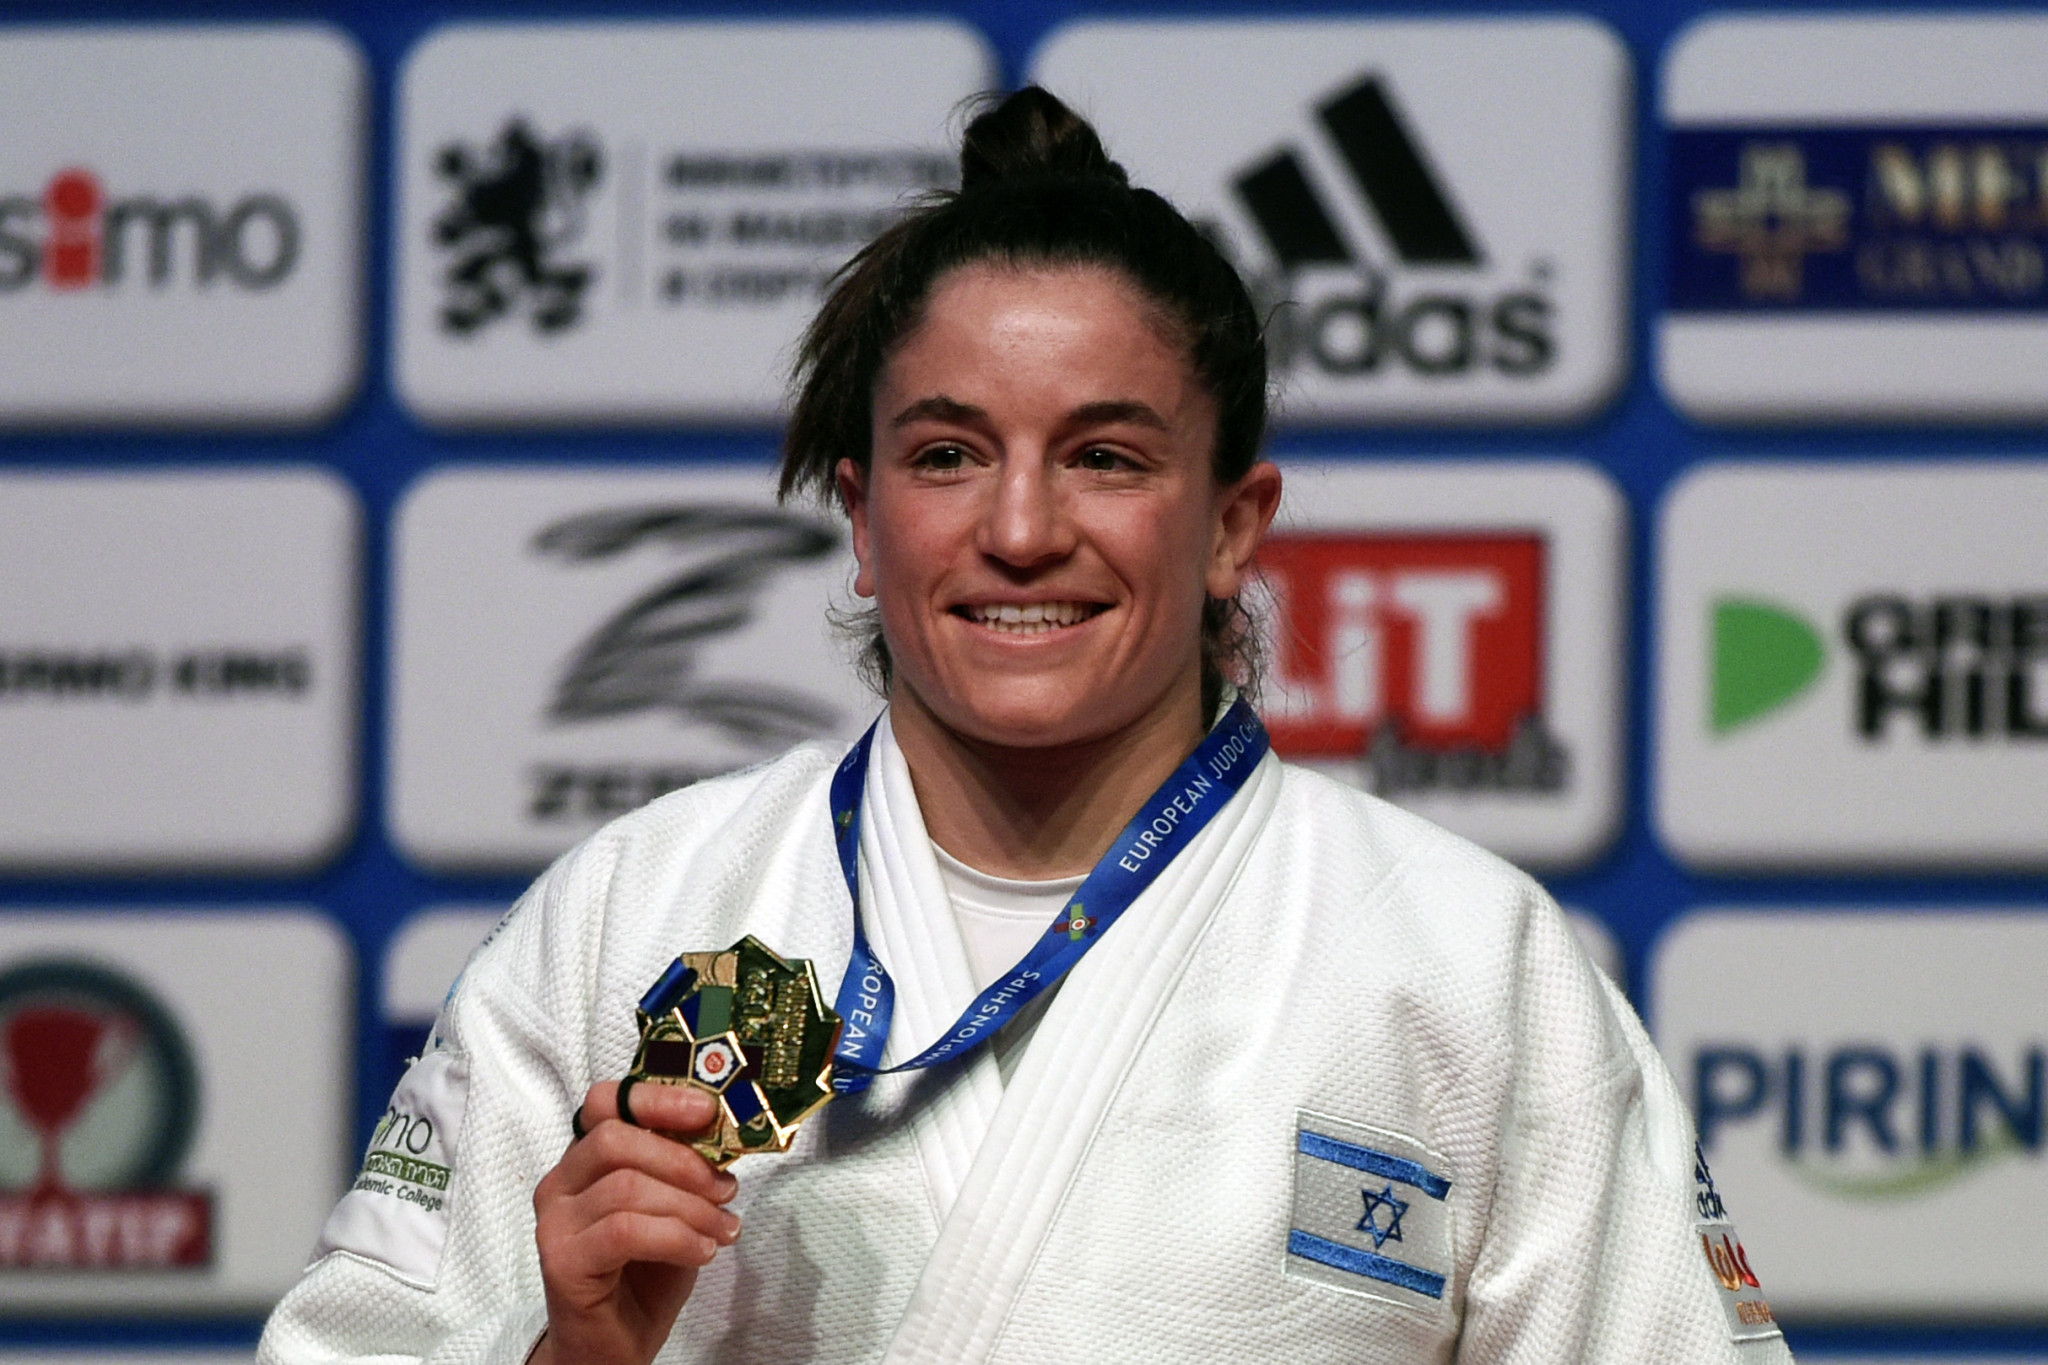 Home interest is set to be high in the women's under-57kg category where Timna Nelson Levy is the world number one ©IJF